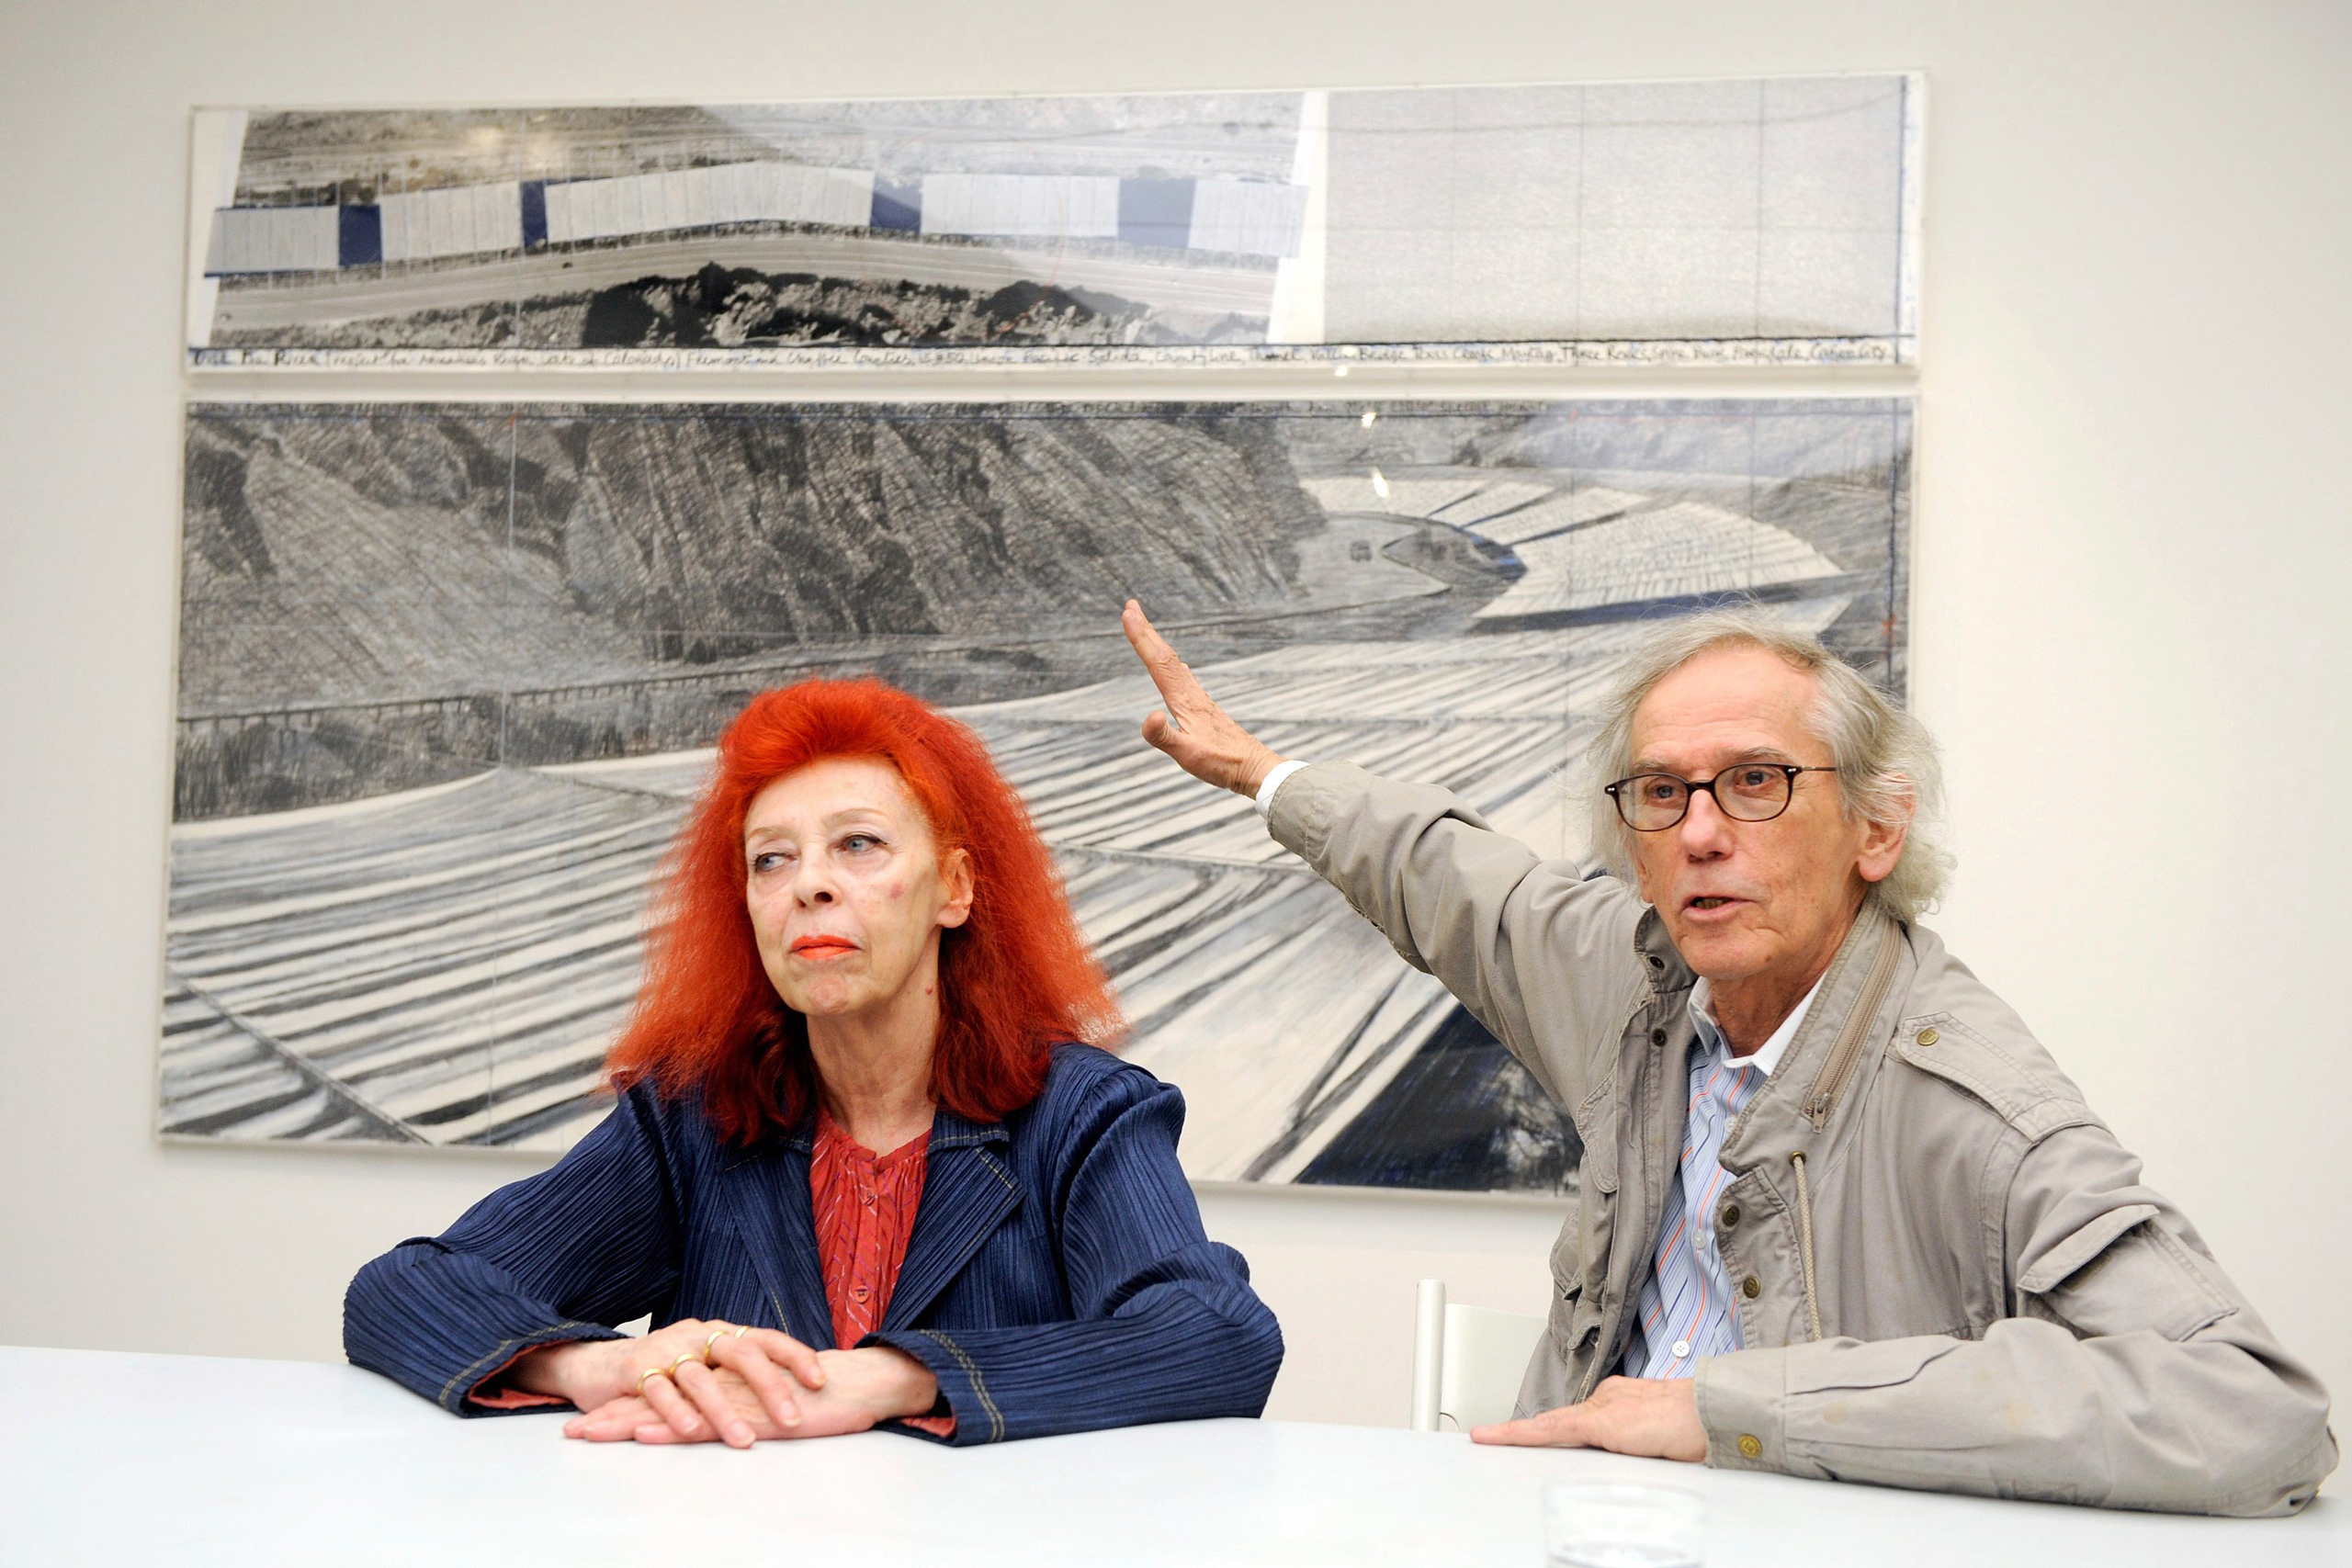 Christo, right, and his partner, Jeanne-Claude, are shown during a press conference for their exhibition "Over the River, A Work in Progress" at the Fondation de l'Hermitage in Lausanne, Switzerland, on Feb. 11, 2009. (Dominic Favre—AP)